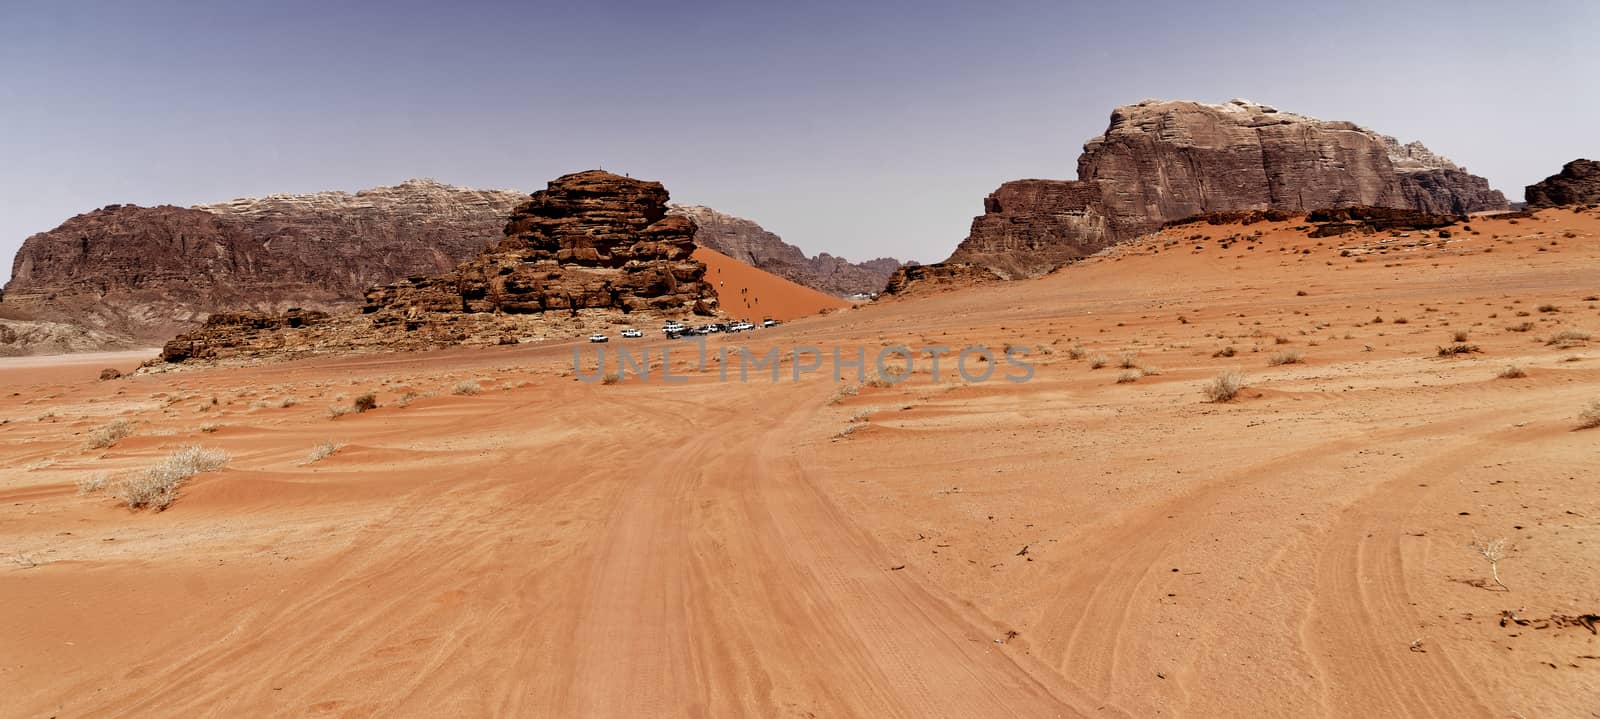 View to a camp for tourists in the desert of the nature reserve of Wadi Rum, Jordan by geogif